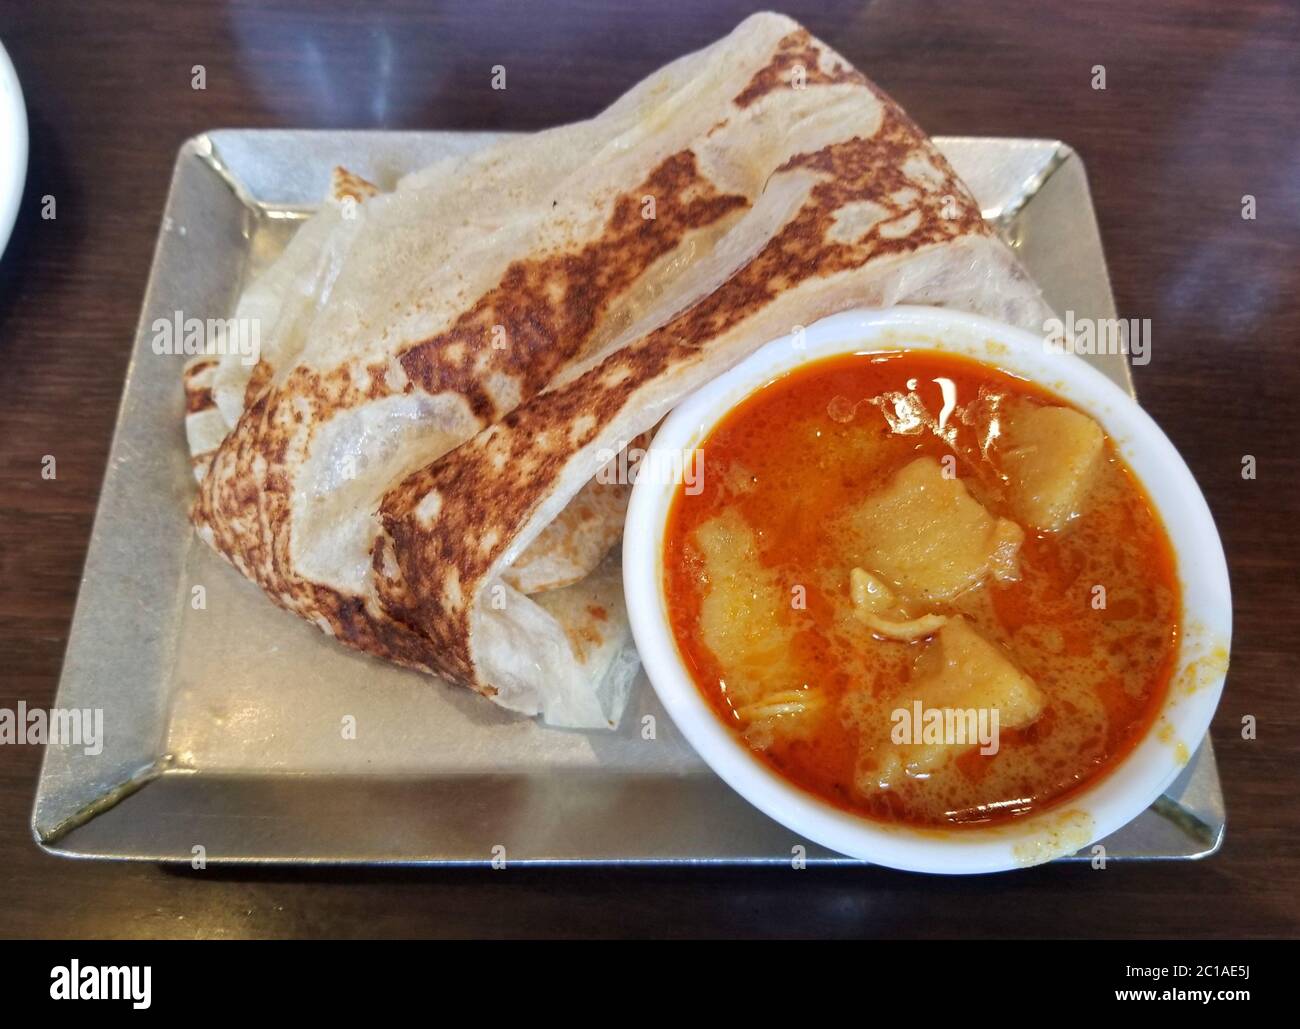 Malaysian pancake, also known as roti canai, with a side of curry gravy Stock Photo